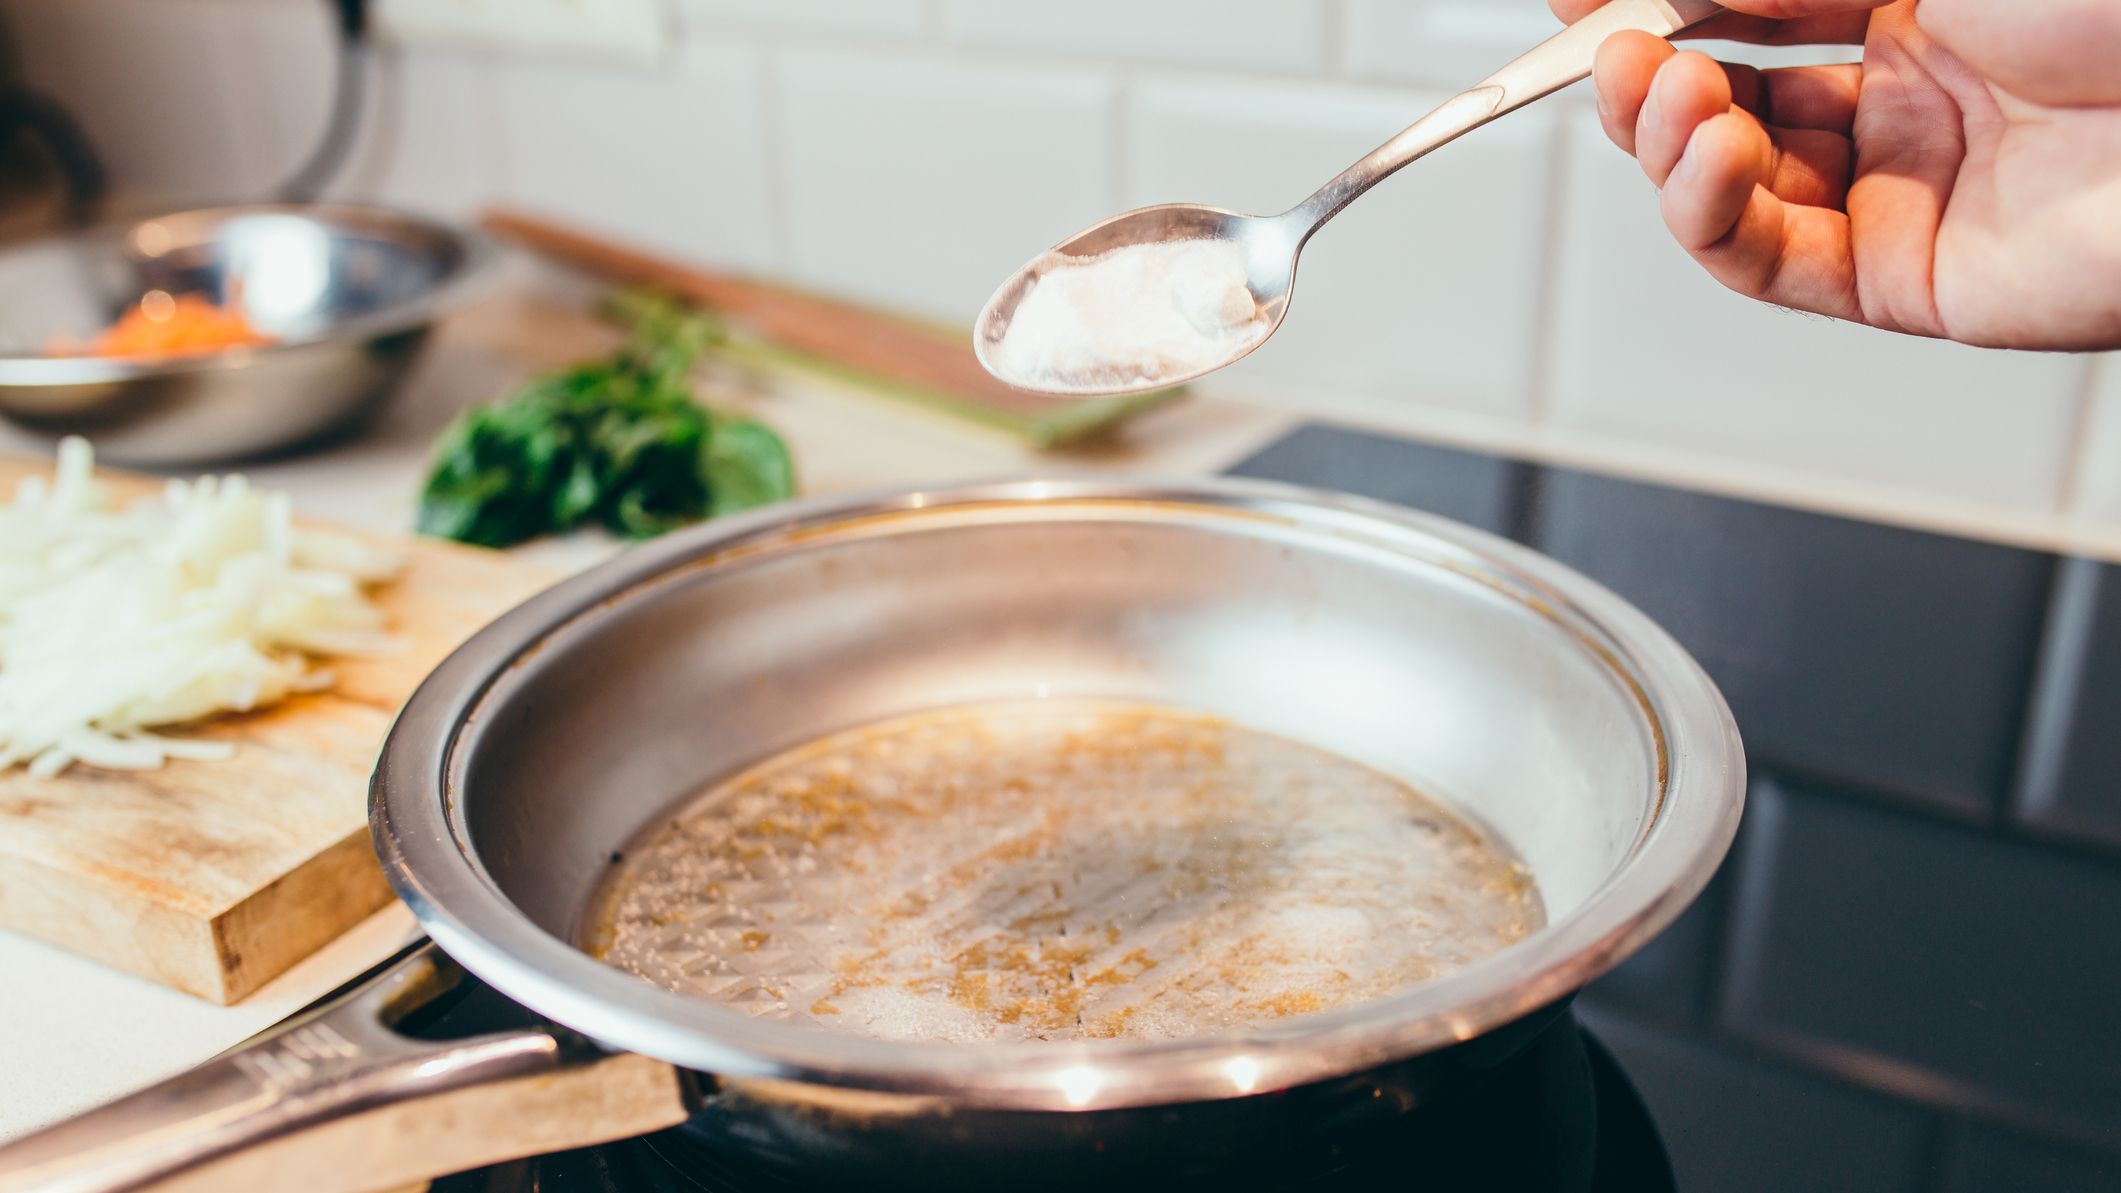 How To Clean A Really Dirty Carbon Steel Pan